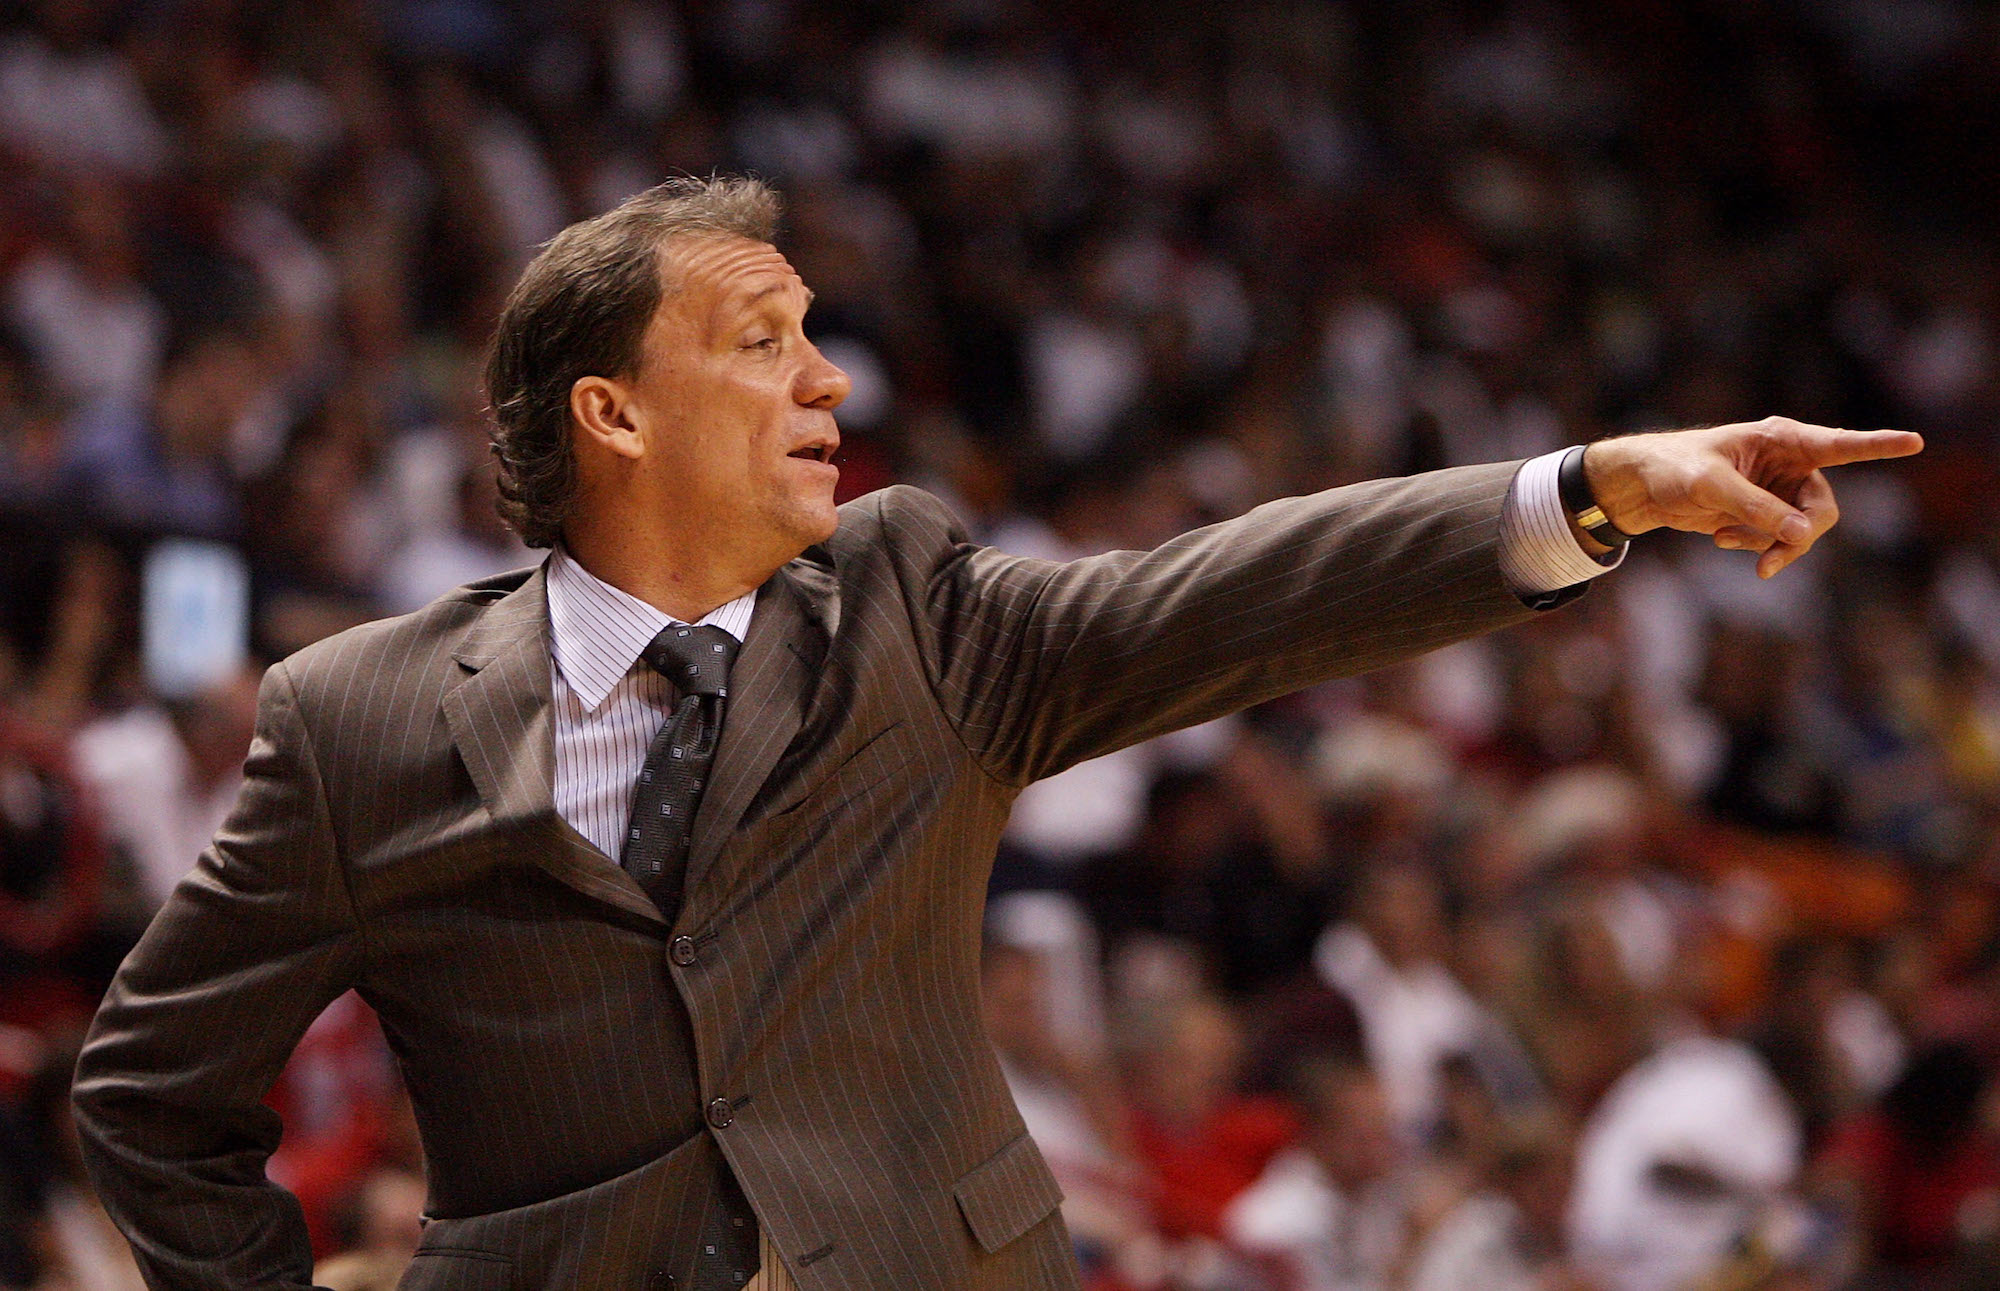 Minnesota Timberwolves coach Flip Saunders tragically died in 2015